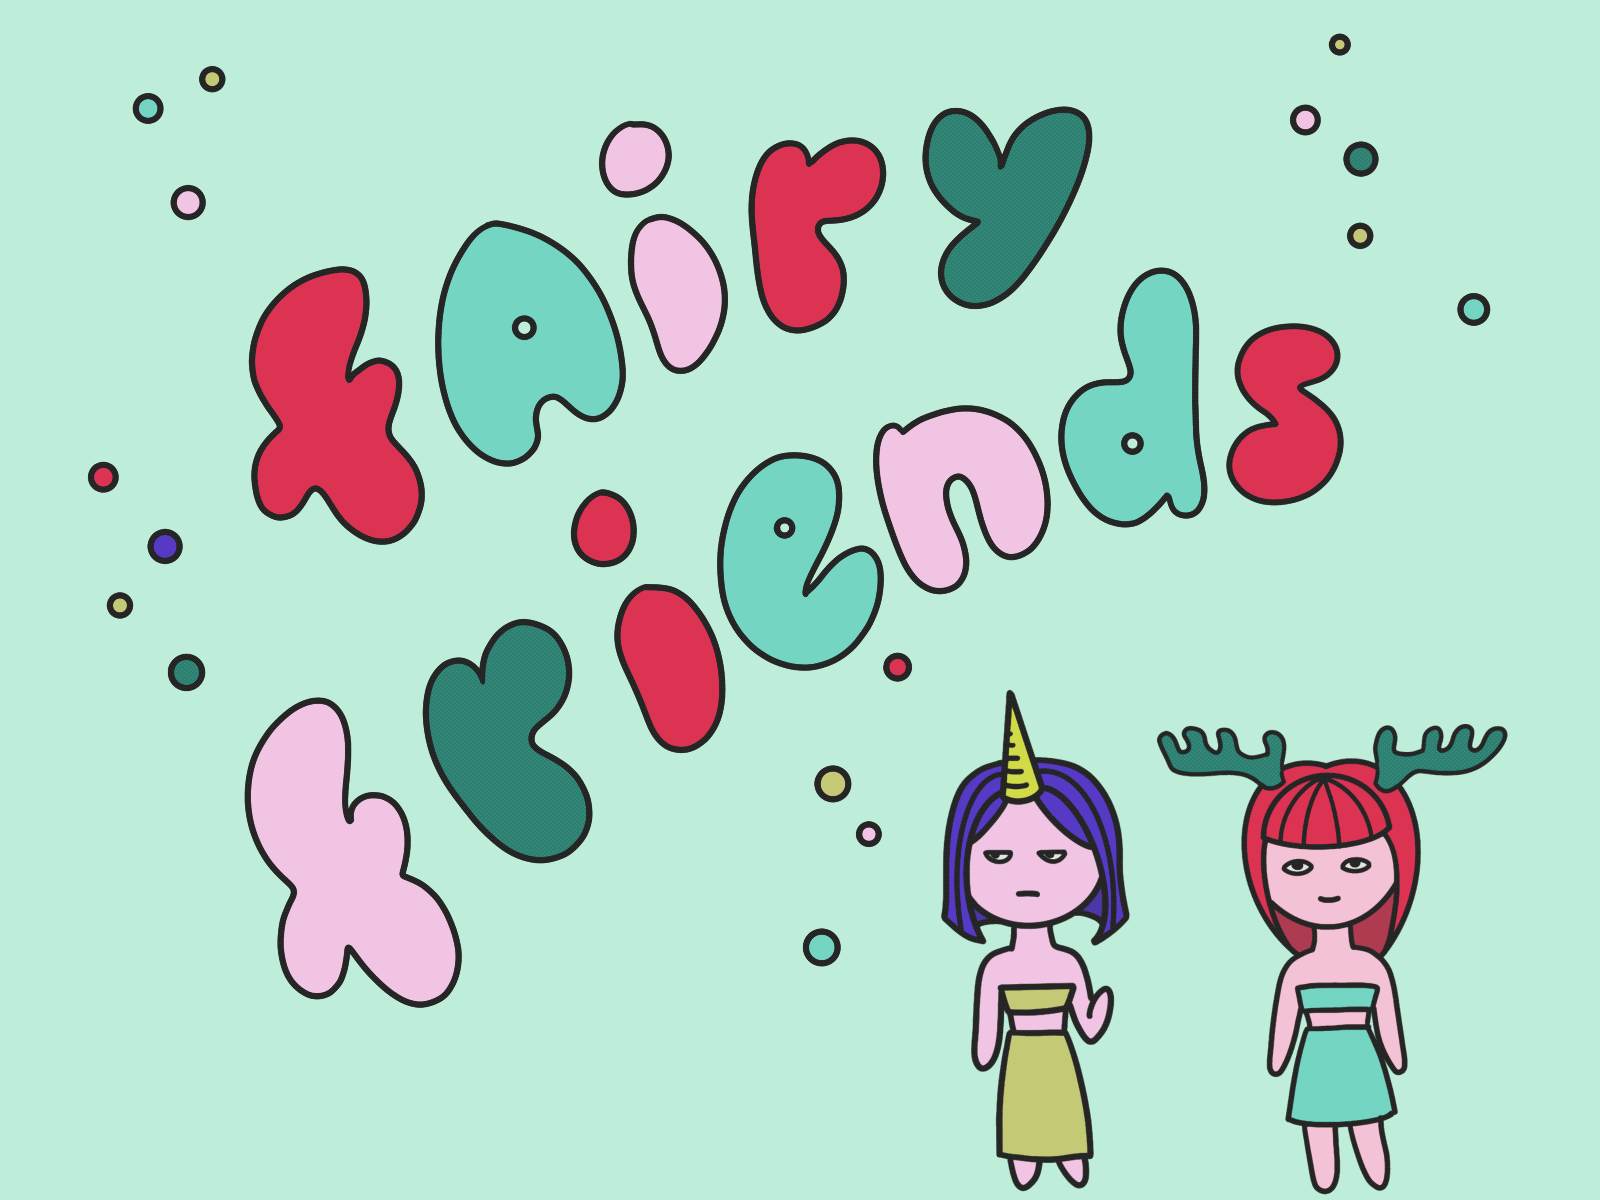 Cover for the "Fairy friends" comic